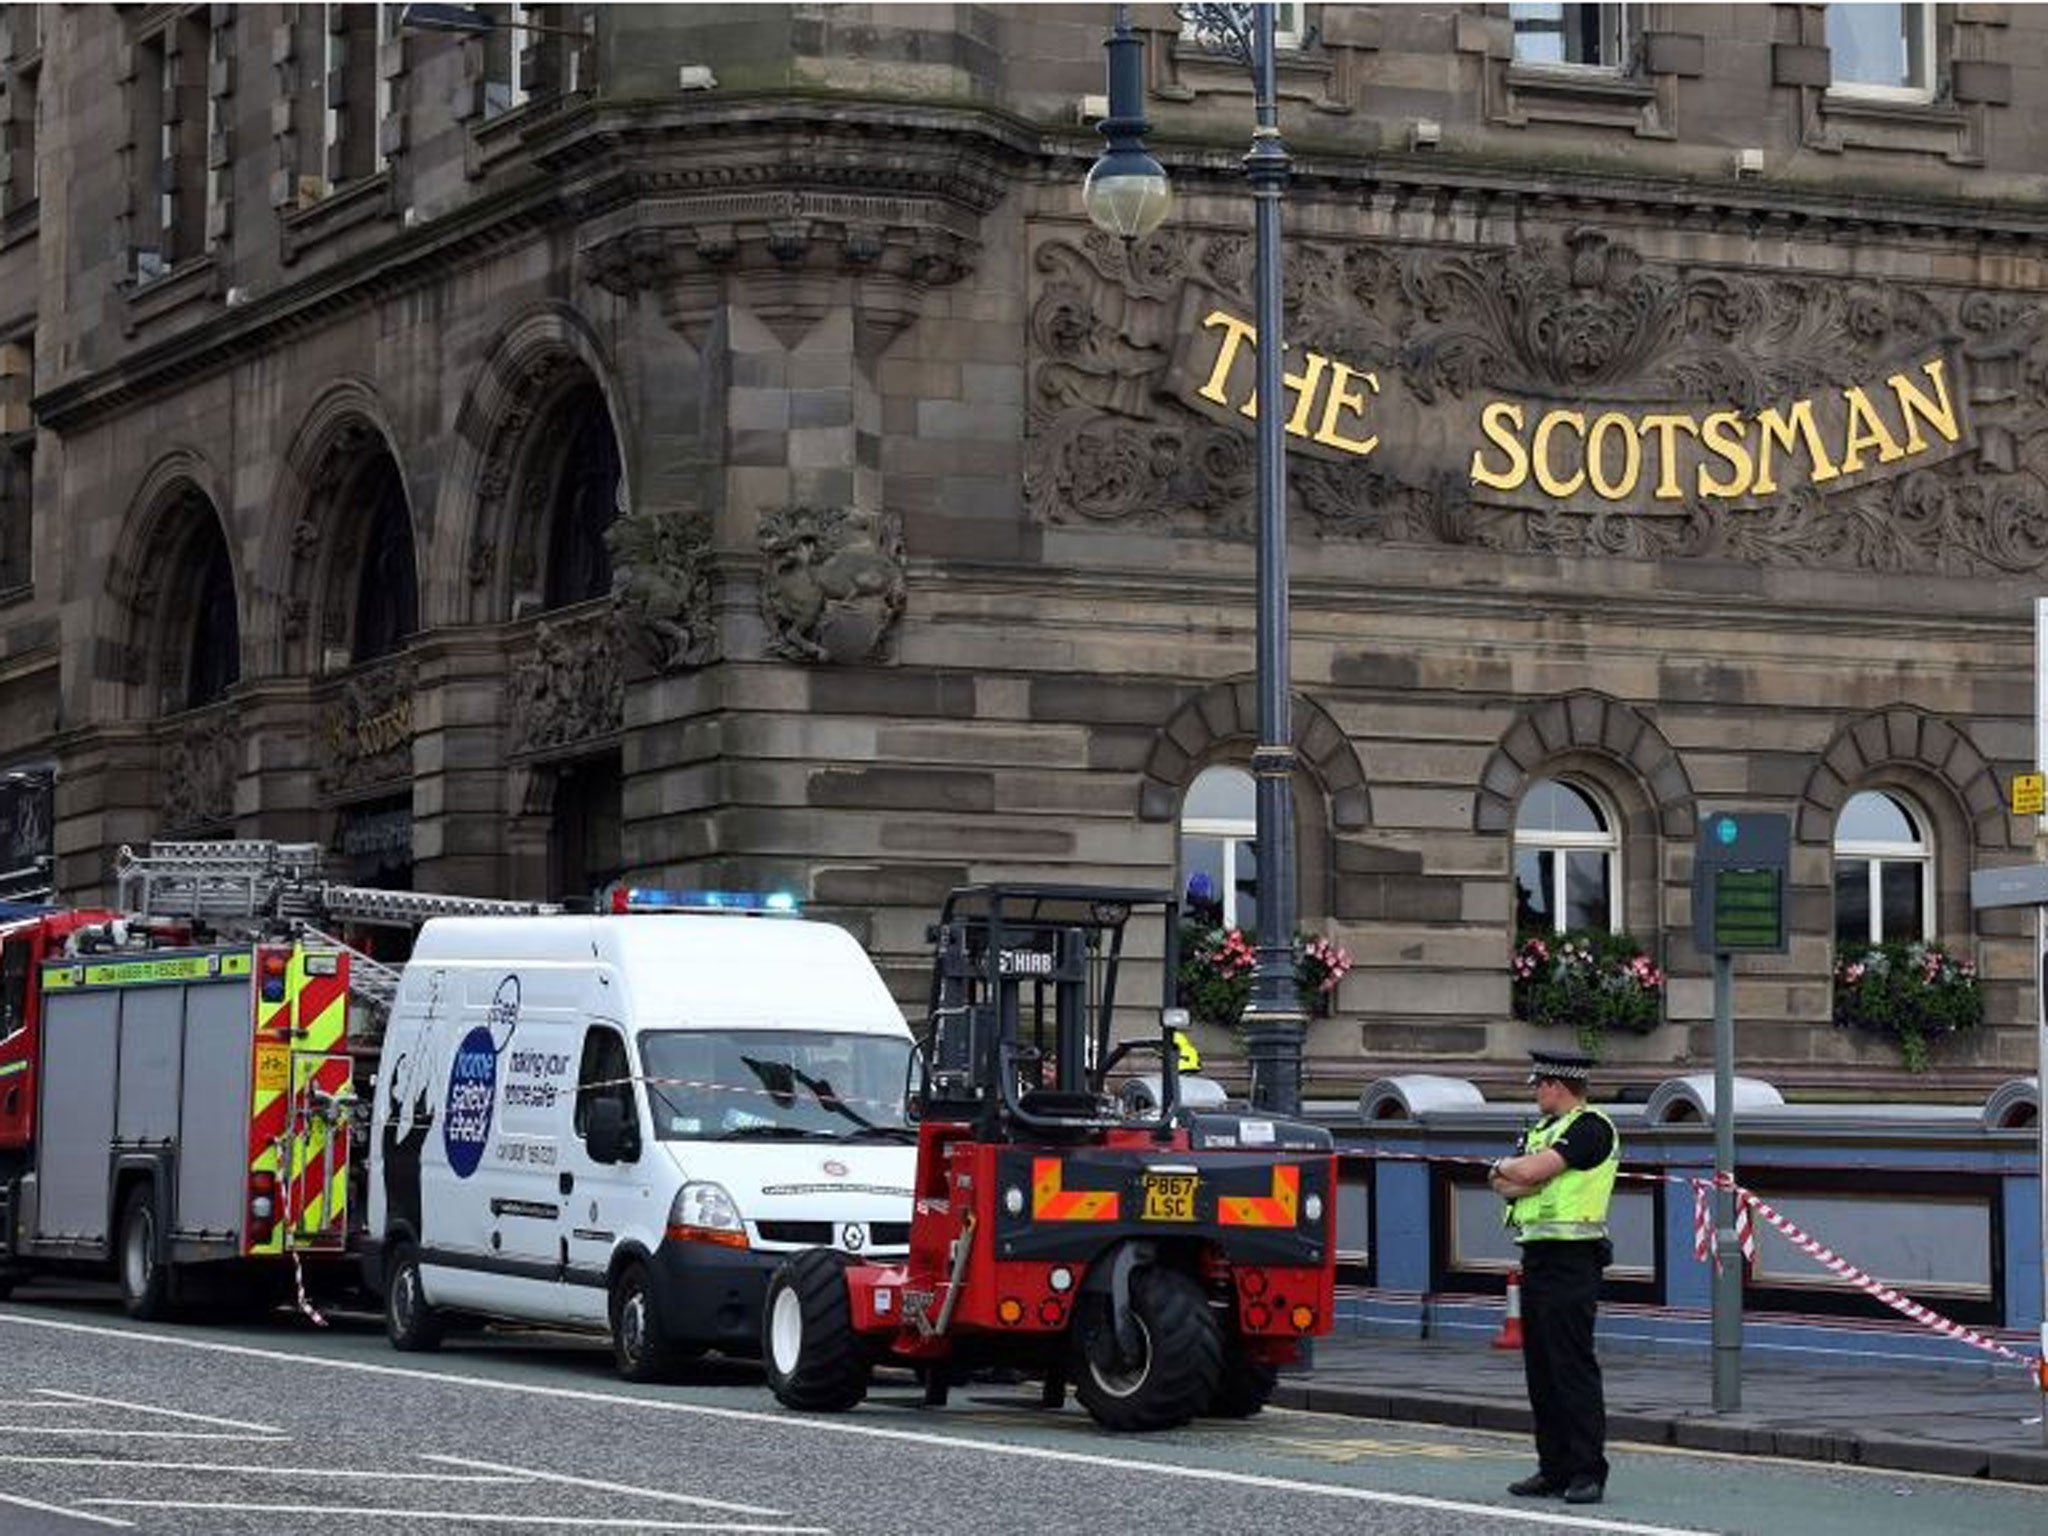 The sixth floor of the Scotsman Hotel was evacuated after two died in a 'chemical incident'